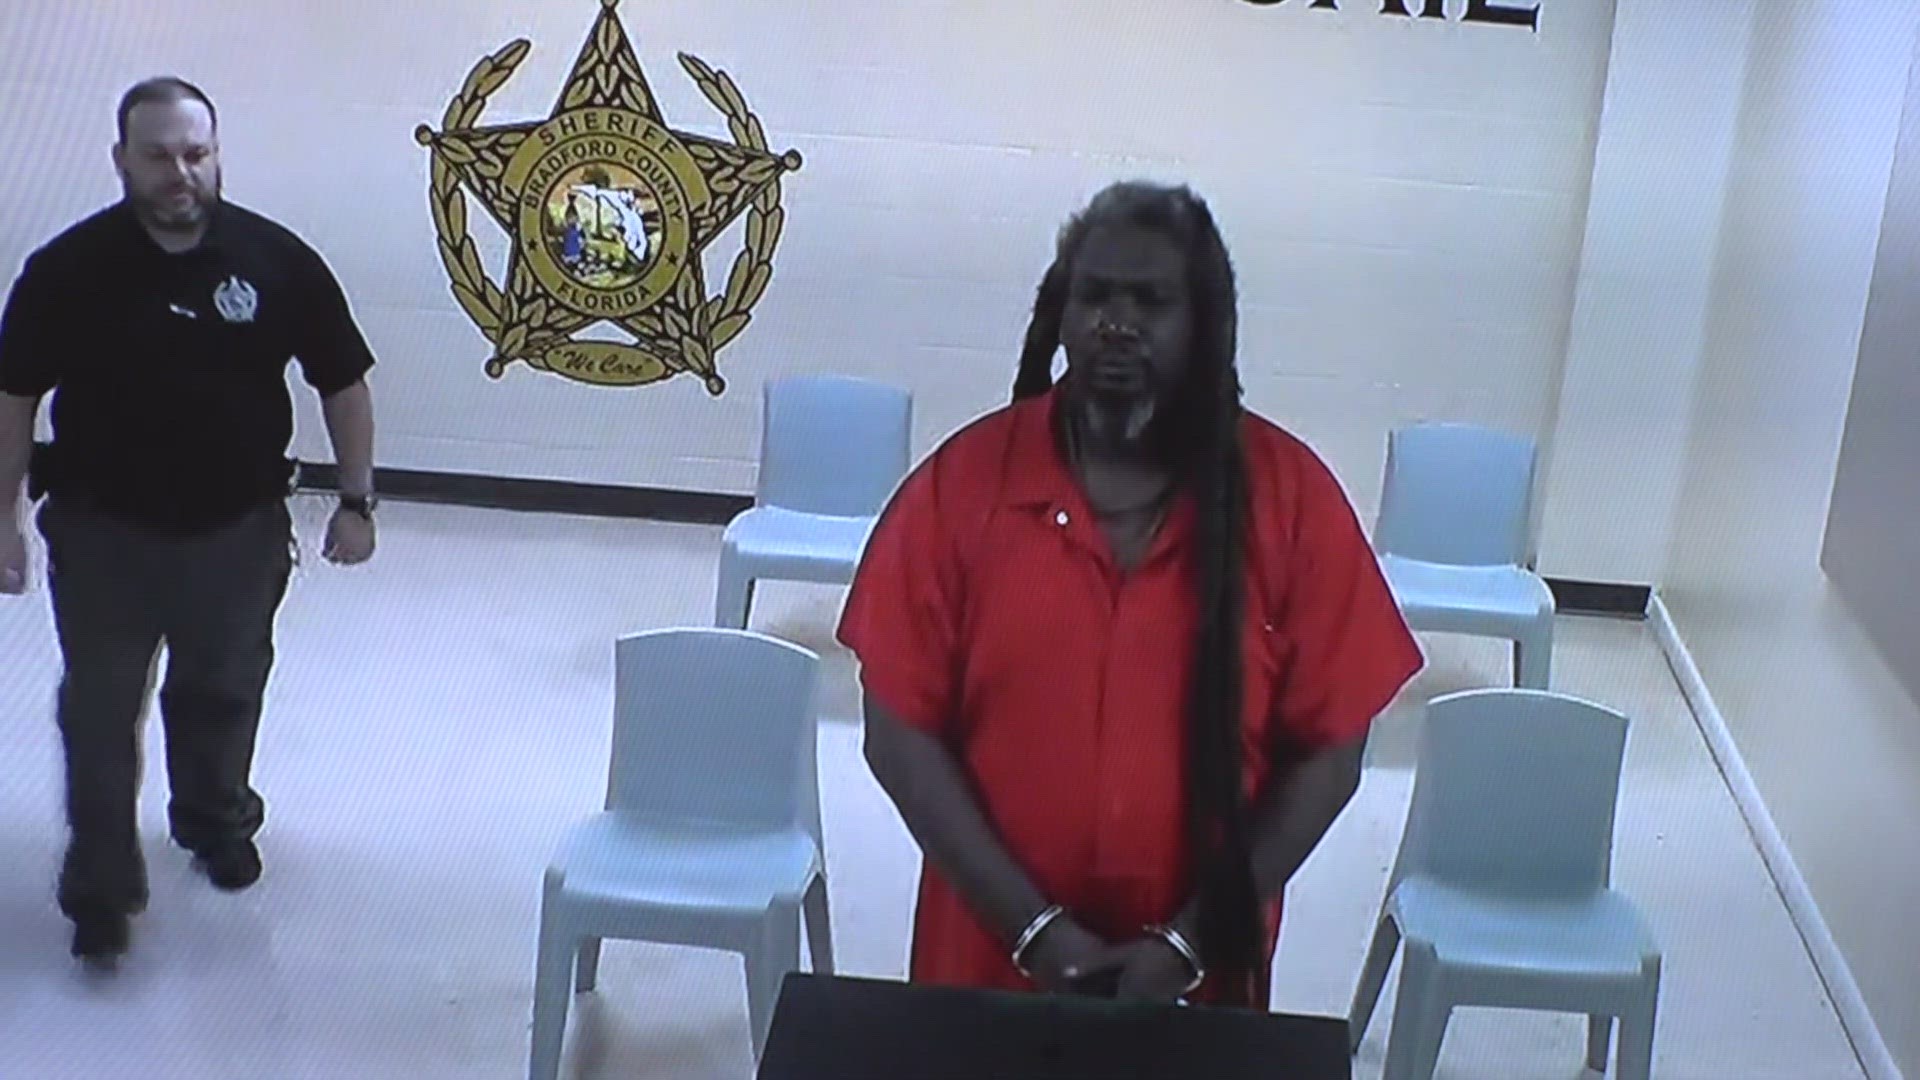 Johnnie Bernard Brown, 46, is charged with four counts of murder in relation to the shooting deaths of Quinqune Robinson, 49, Danesha Sims, 27, & Winshay Roddey, 25.